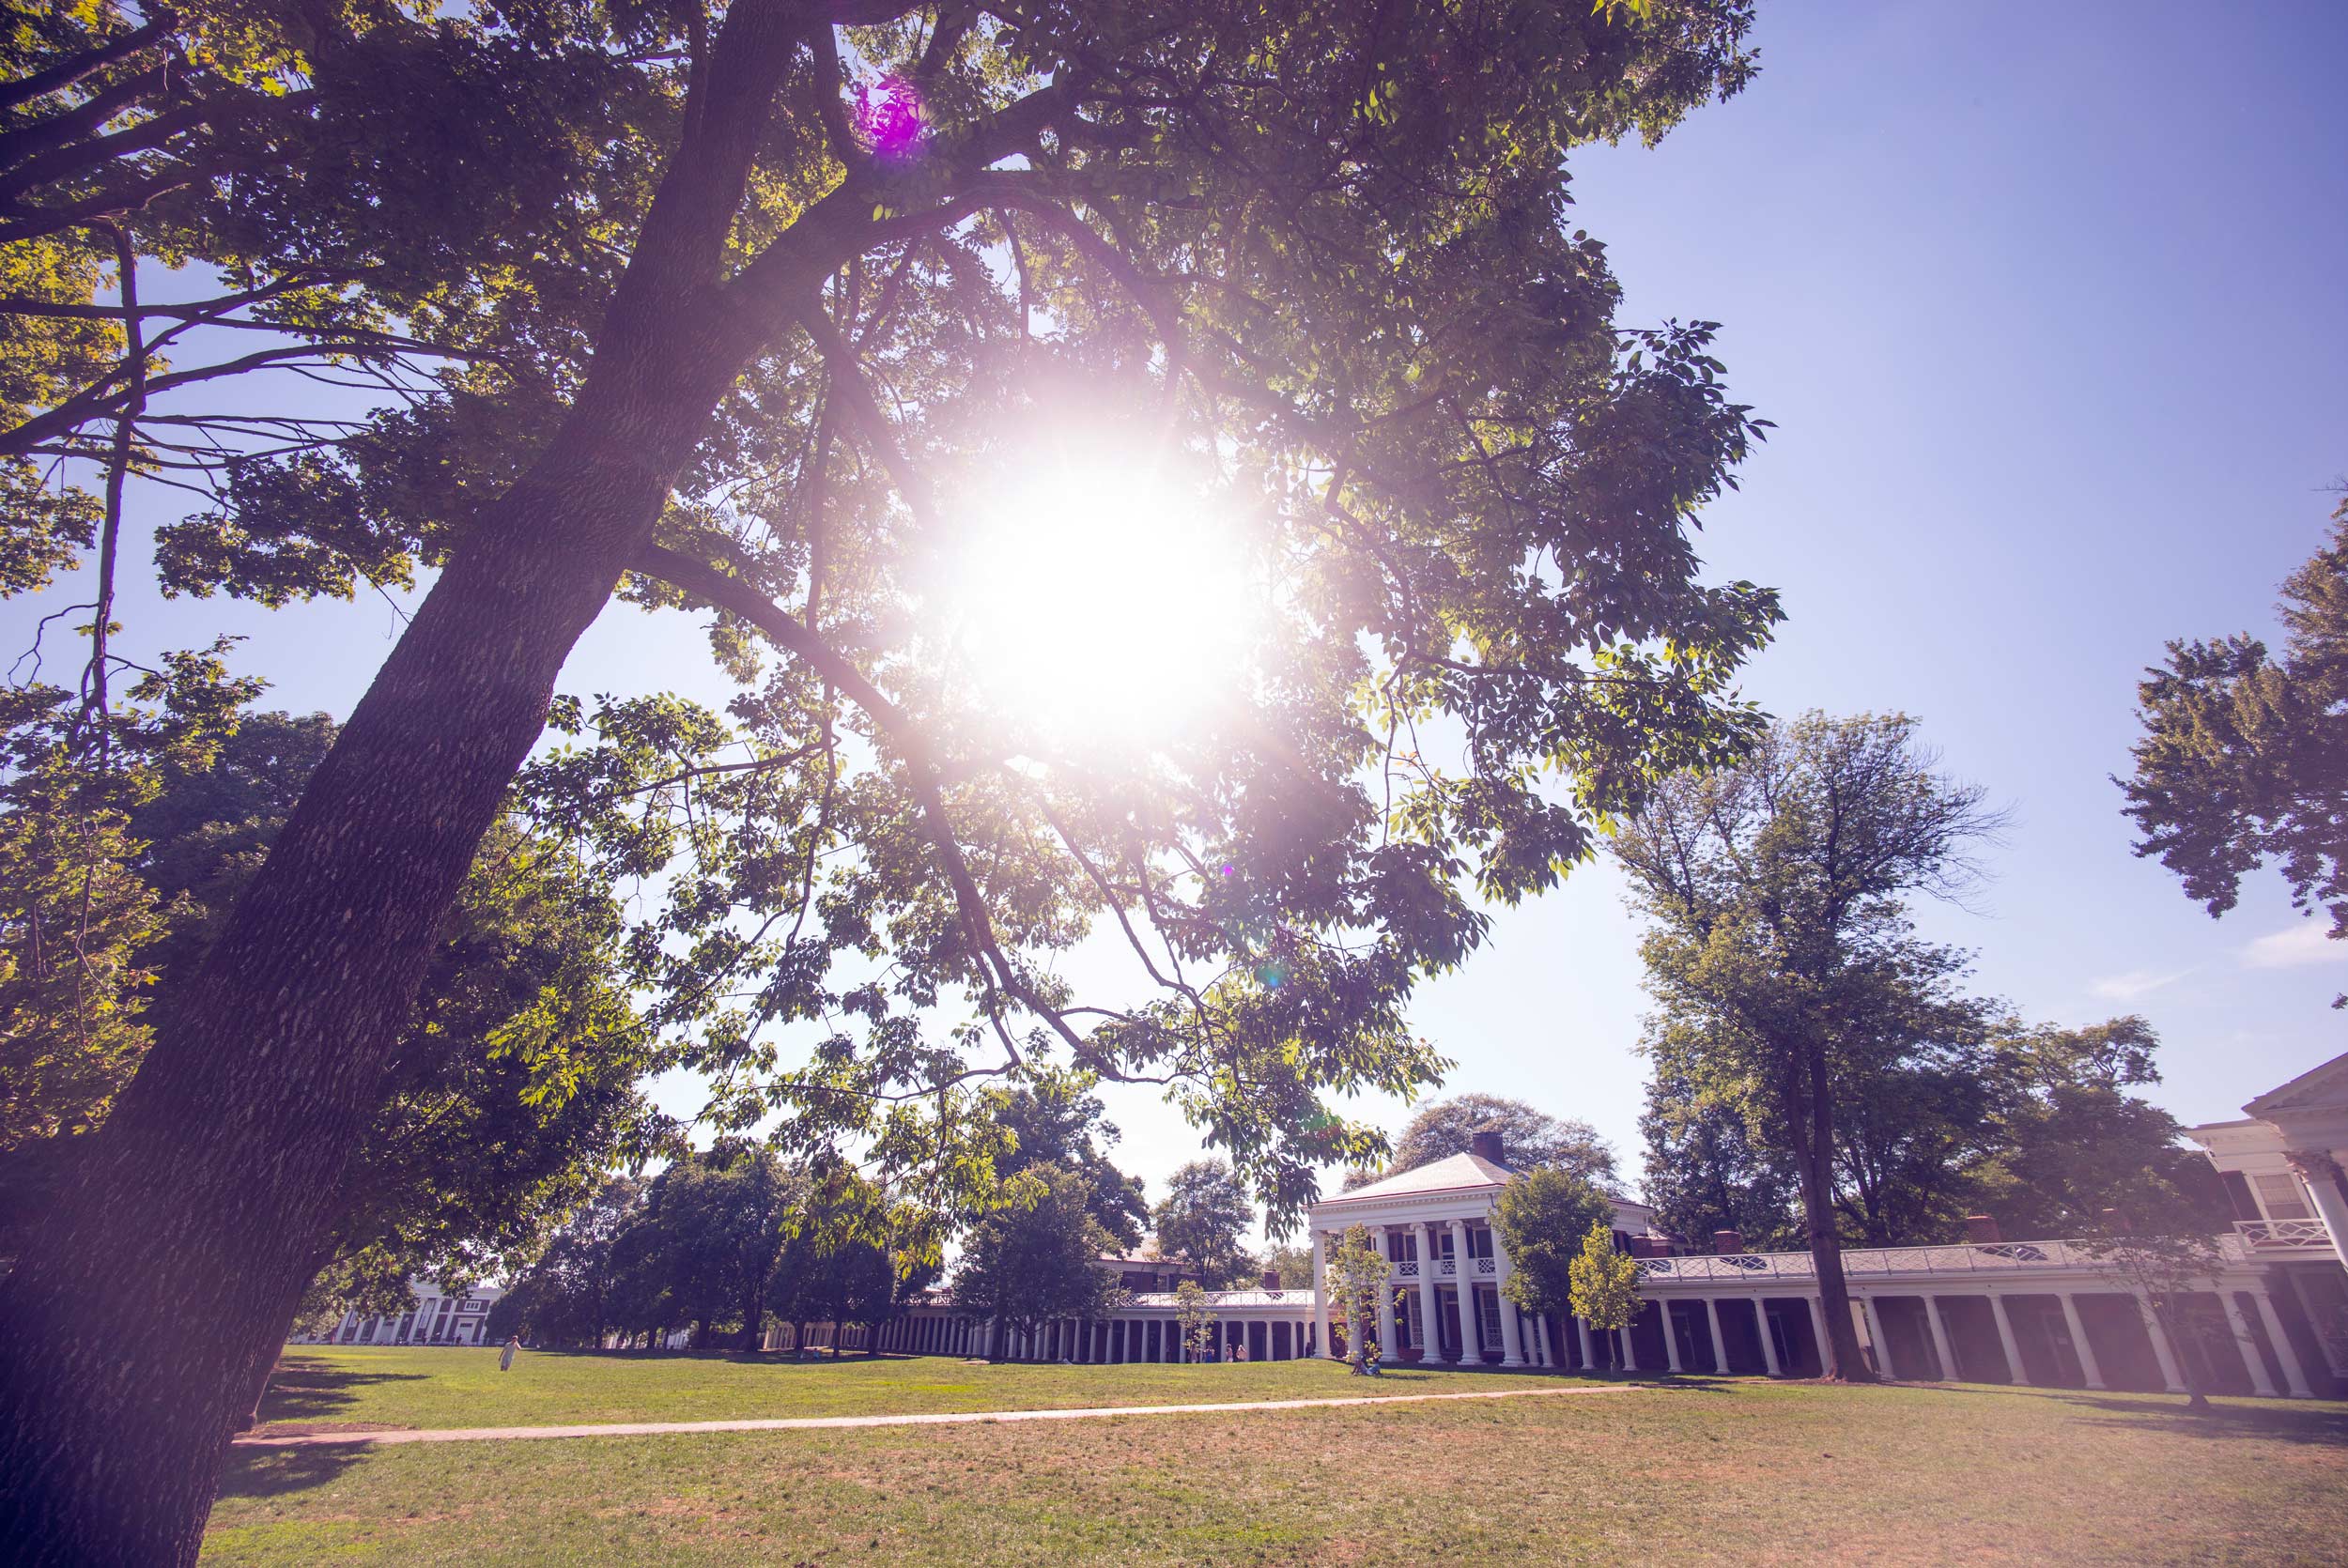 The University of Virginia’s Lawn as the sun peaks through a tree